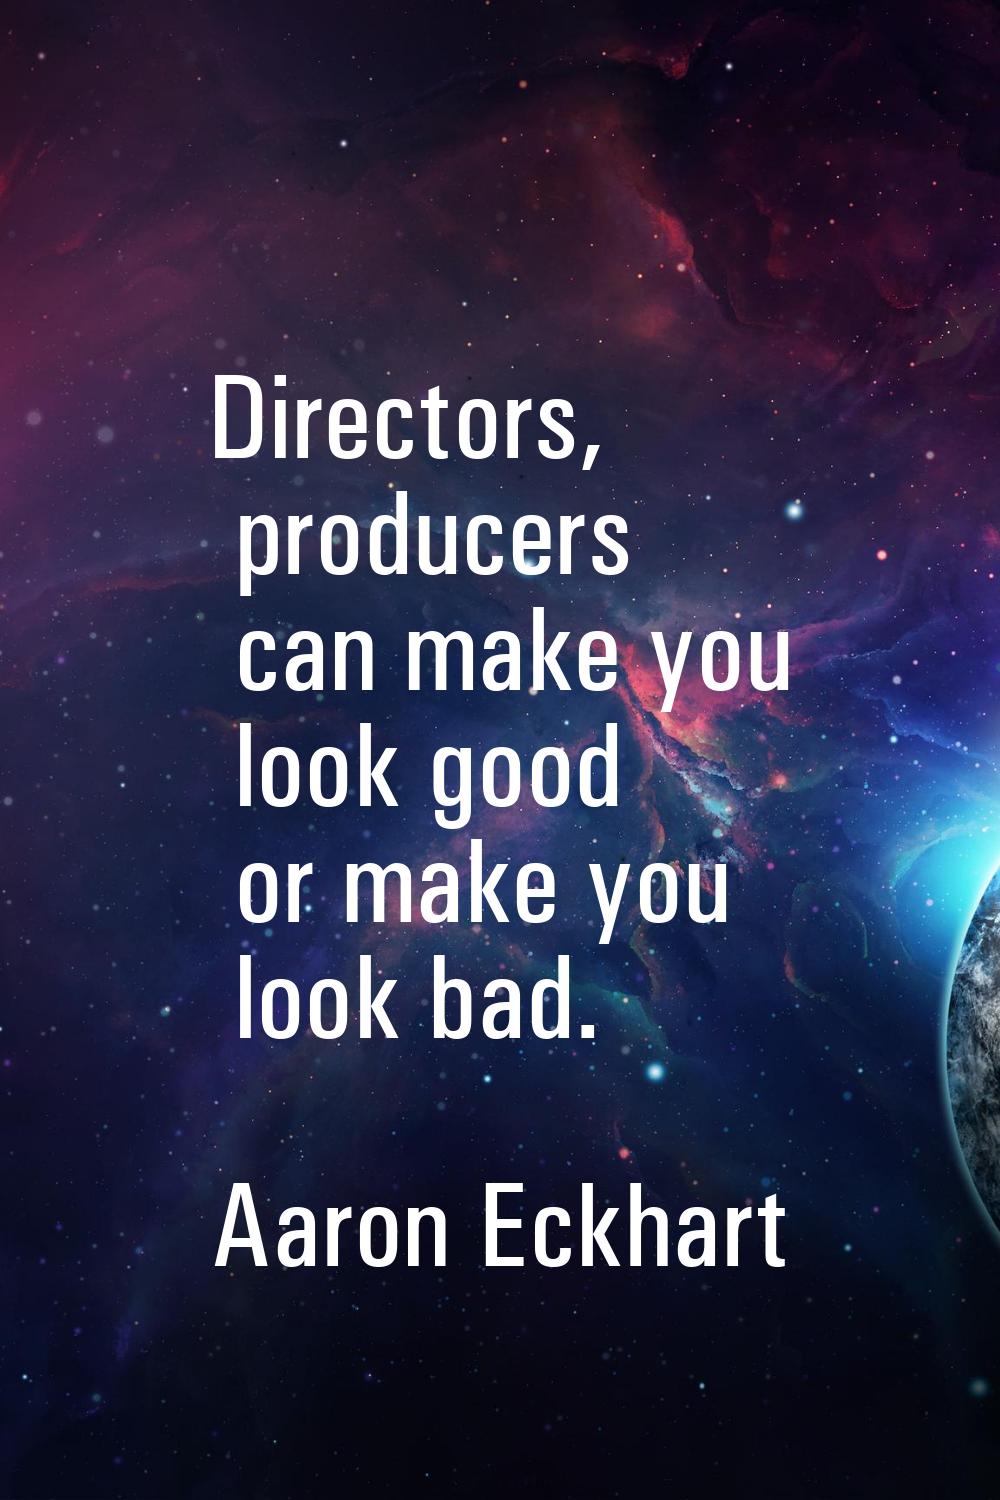 Directors, producers can make you look good or make you look bad.